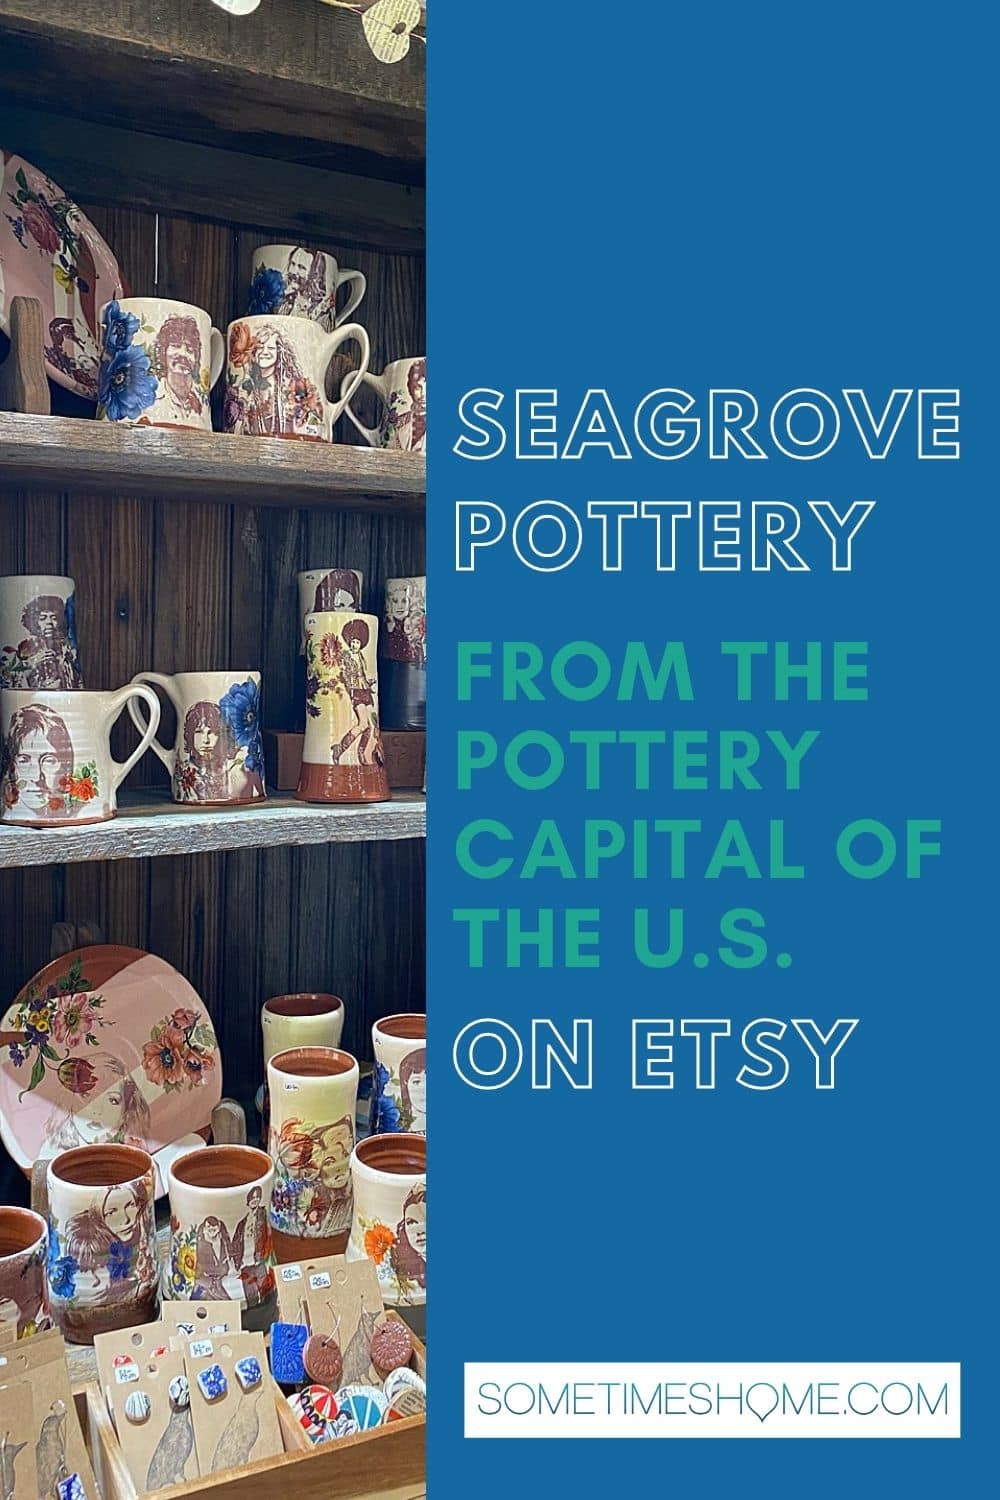 Seagrove pottery, from the Pottery Capital of the U.S., on Etsy from North Carolina with a photo of shelves of mugs by Stephanie Martin.